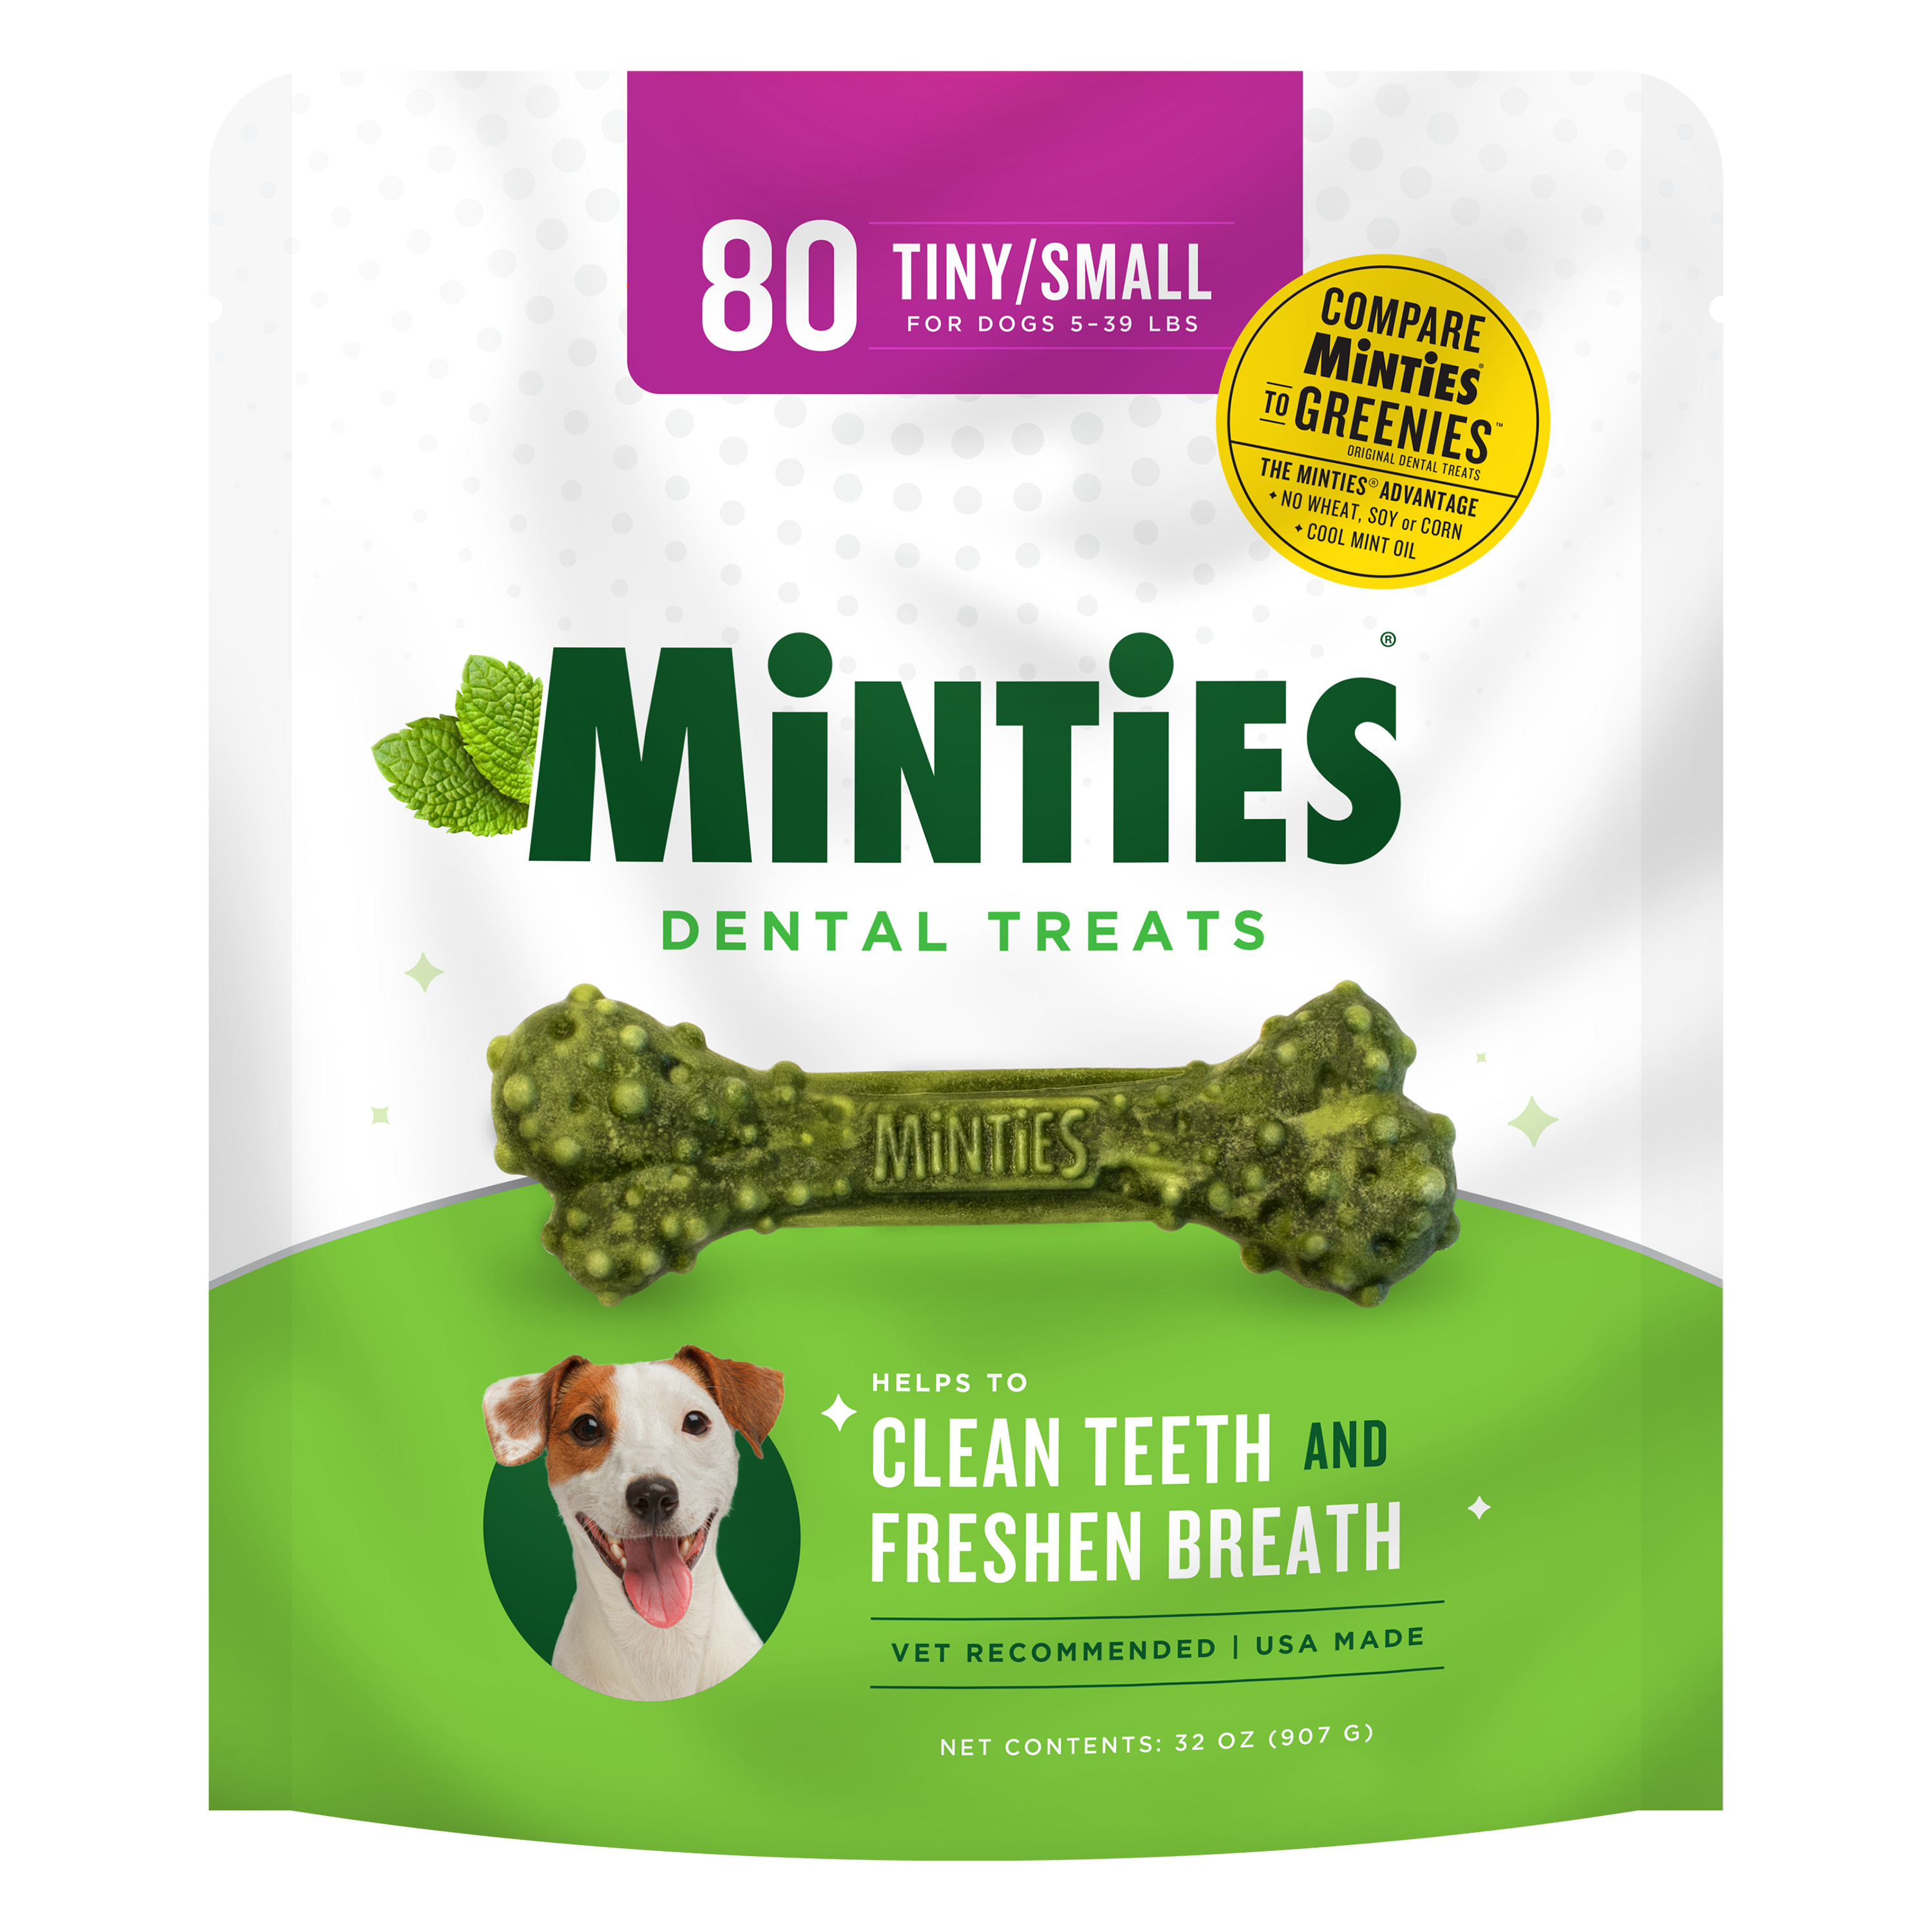 Minties Dental Bone Treats, Chews for Tiny/Small Dogs under 40 lbs, 80 Count, 32 oz, Shelf-Stable - image 1 of 9